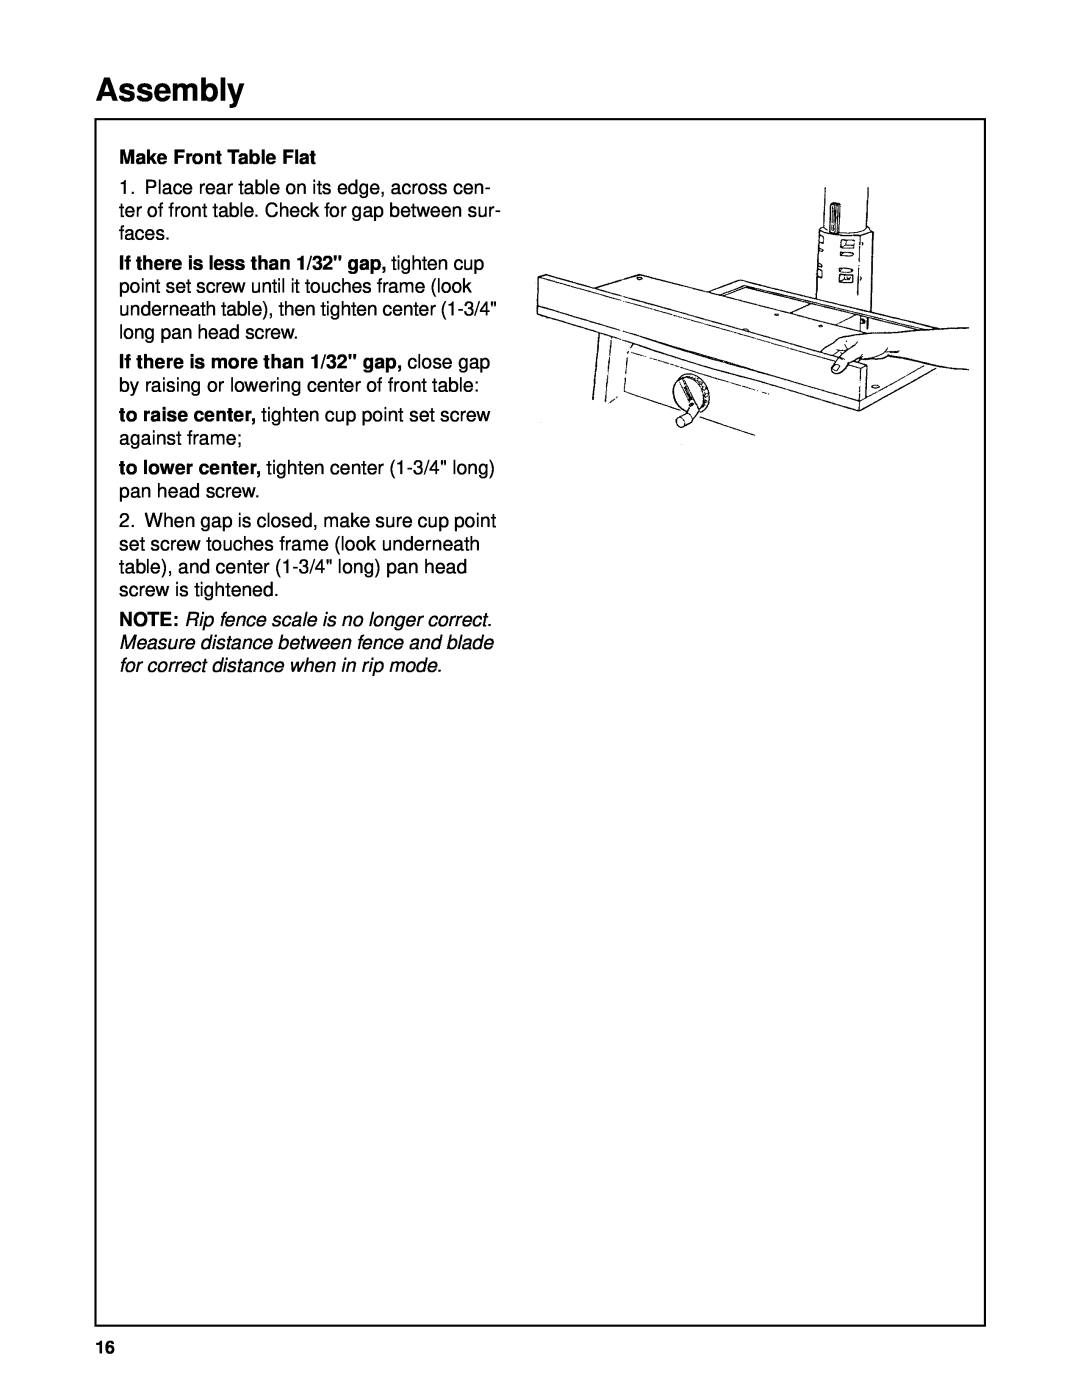 Craftsman 509399, 509398 owner manual Assembly, Make Front Table Flat 